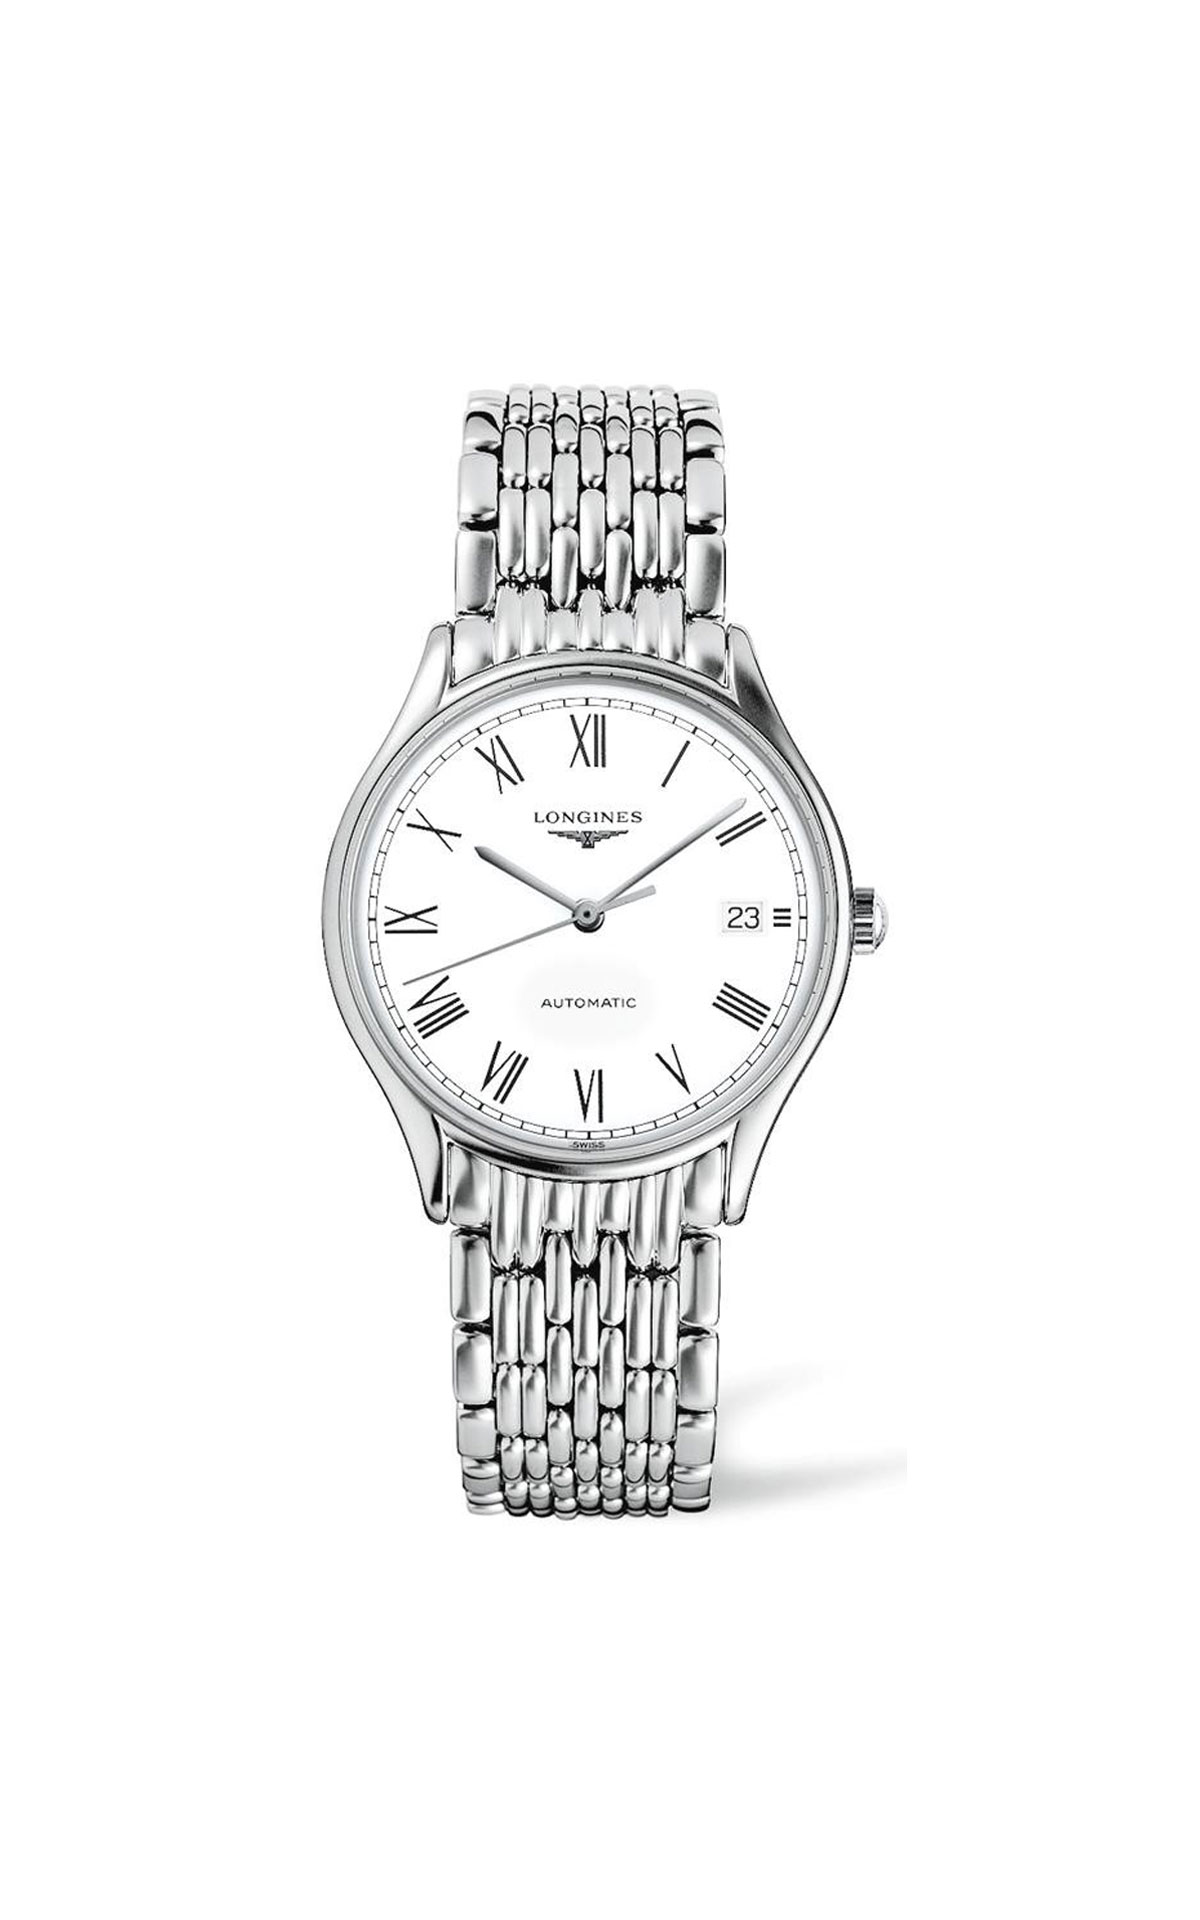 Hour Passion Longines Lyre Gents Watch from Bicester Village